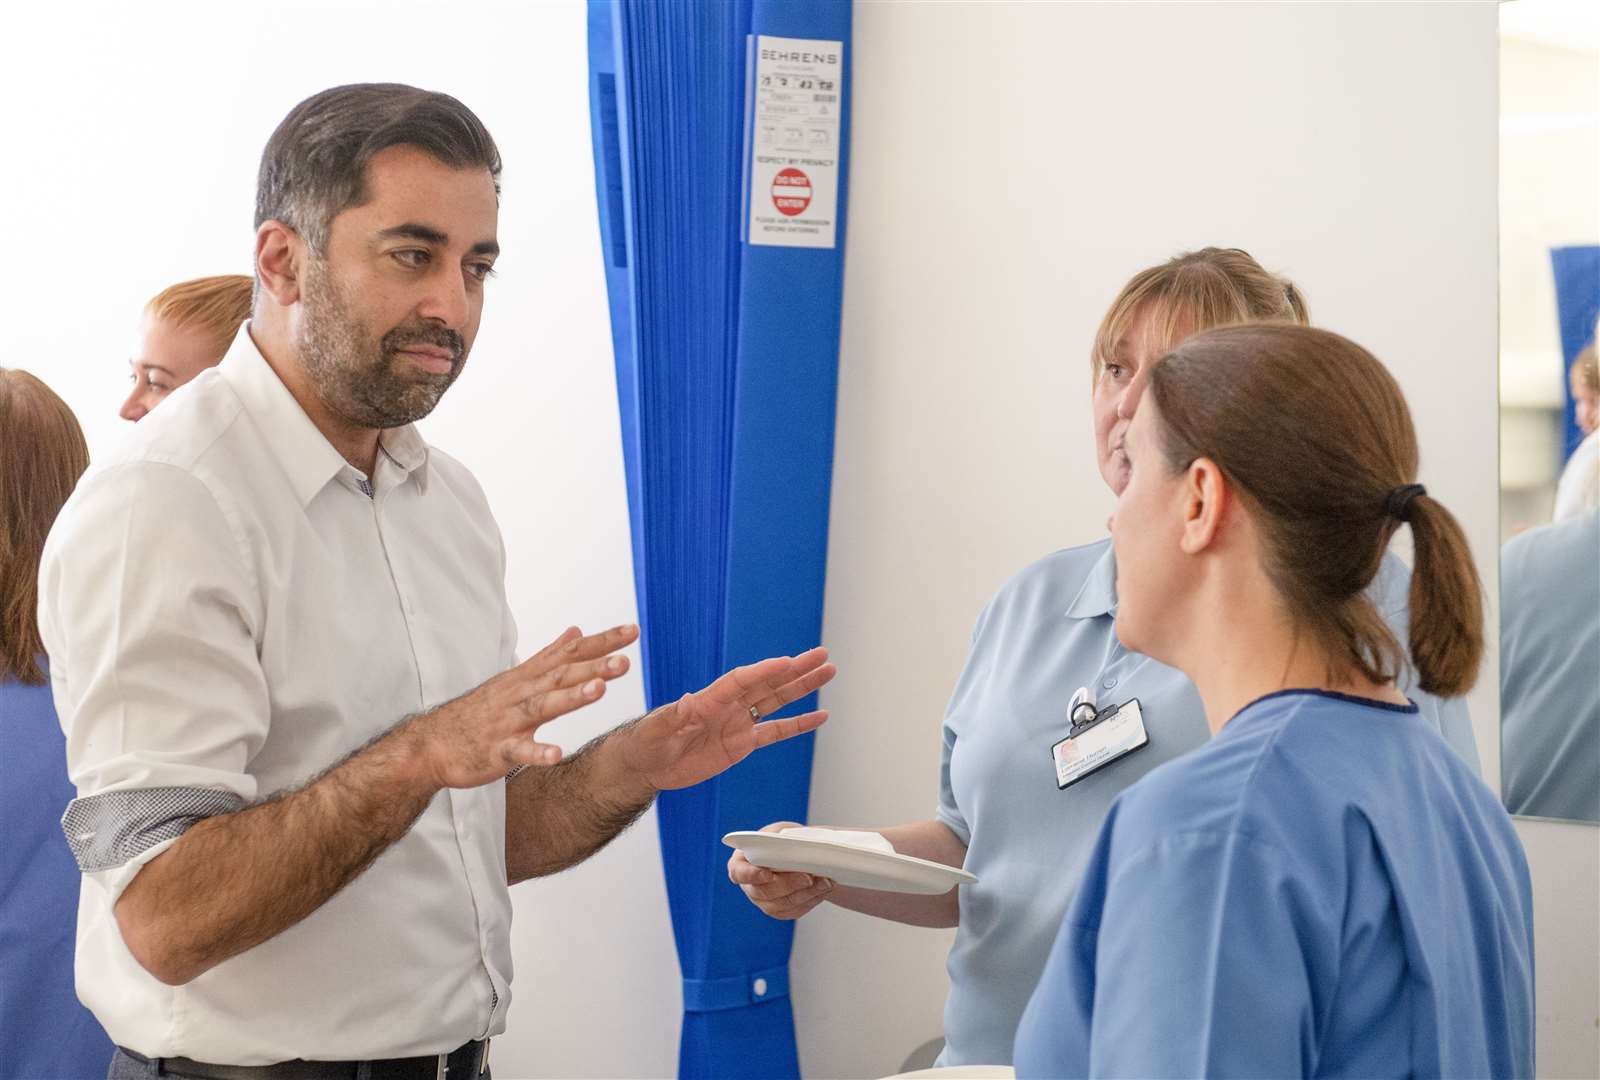 Humza Yousaf speaks to staff during his visit to NHS Forth Valley Royal Hospital (Lesley Martin/PA)